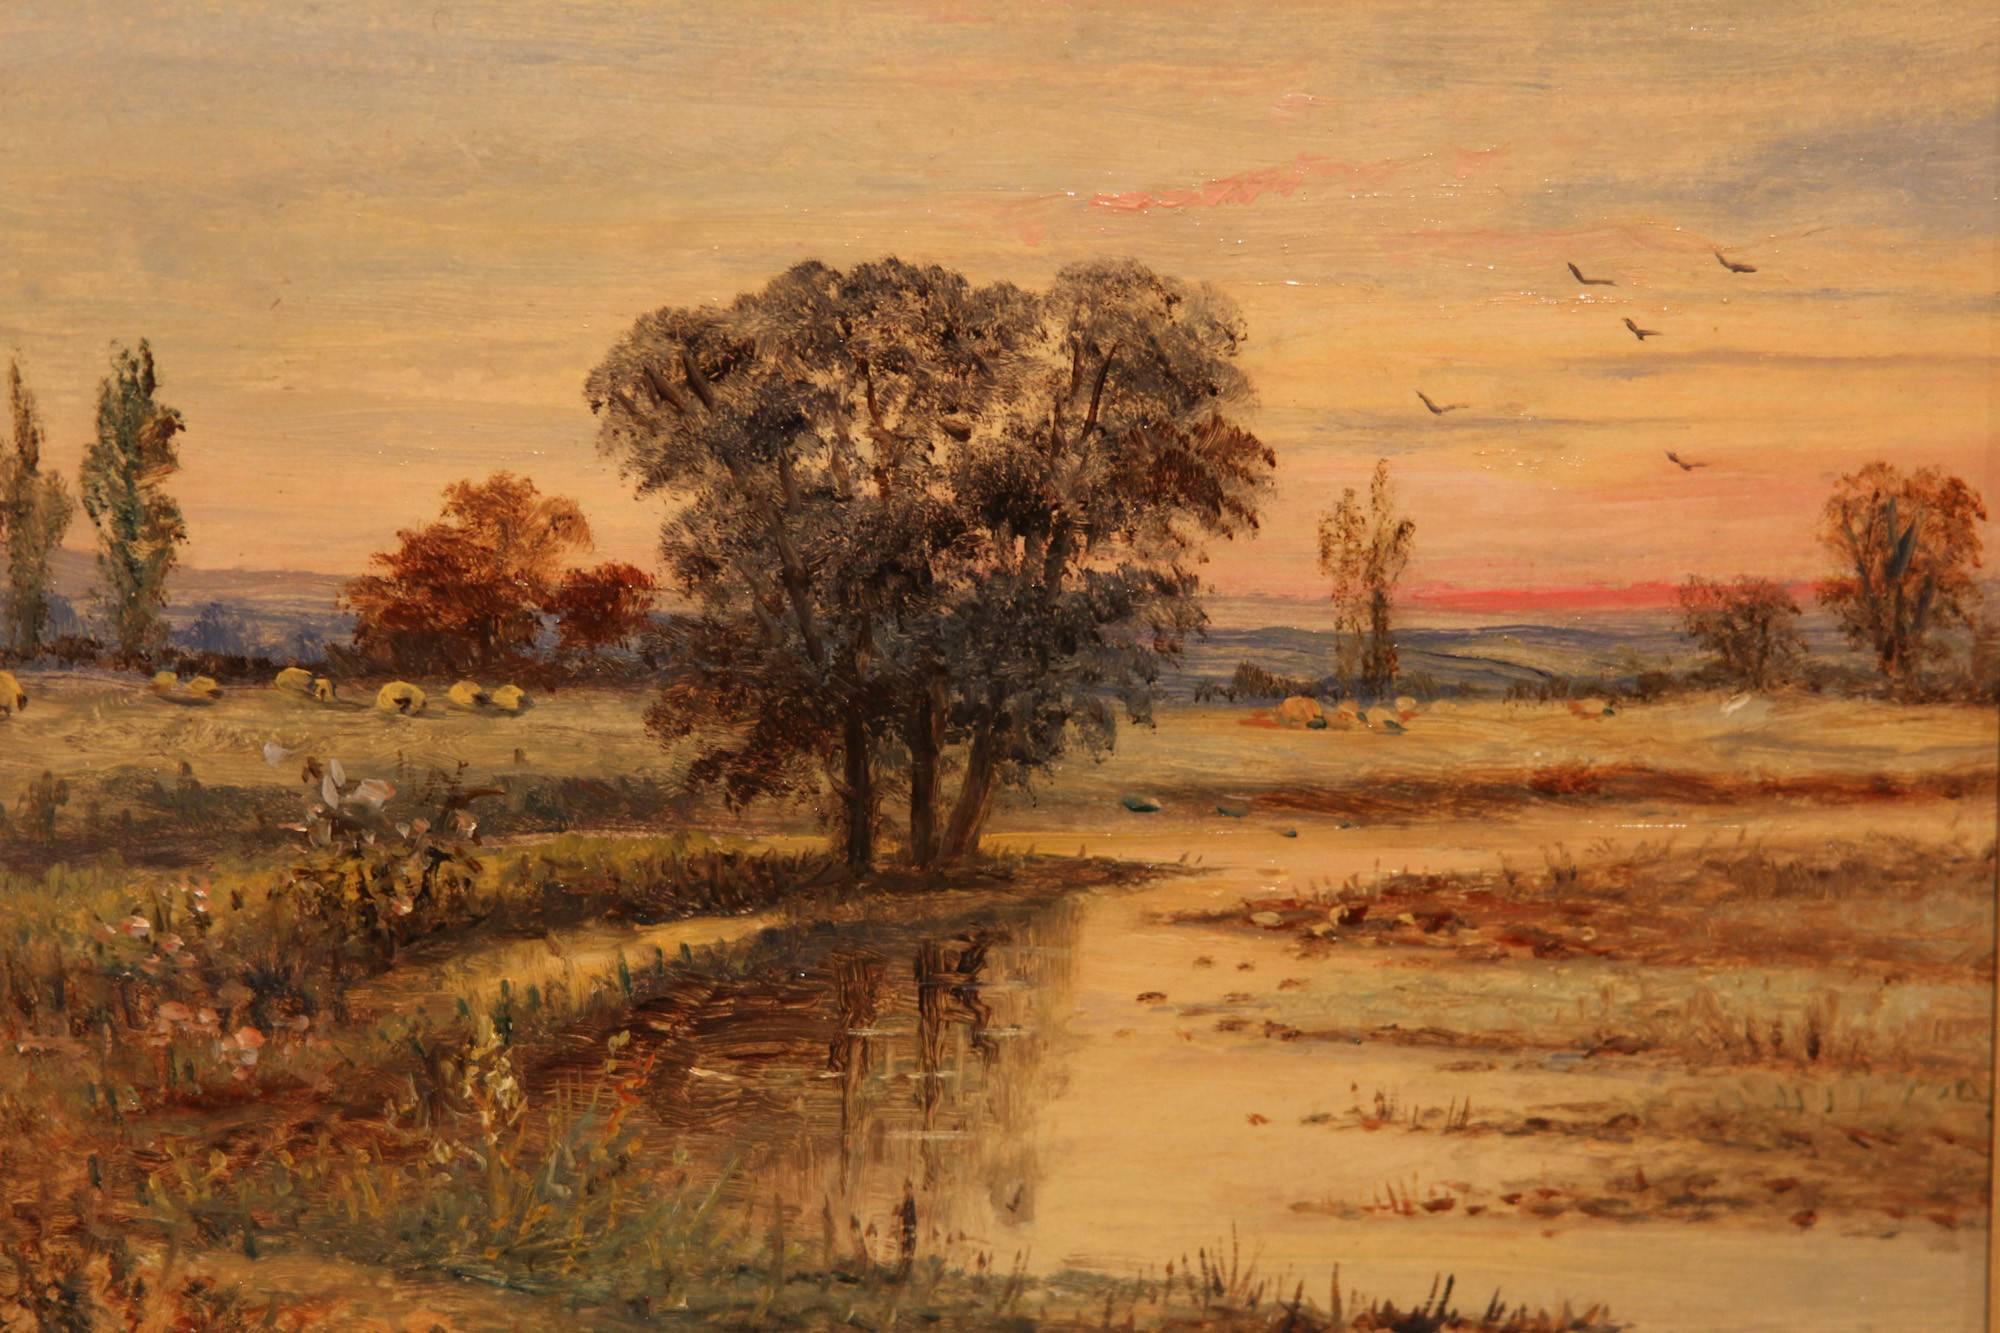 Pair of oil paintings "East Anglian Landscapes" by Christopher M. Maskell. Christopher Mark Maskell 1858-1930 was a Suffolk School landscape and marine painter. Both oil on board, 10 x 12" one signed fully, one initials. 

Measures: